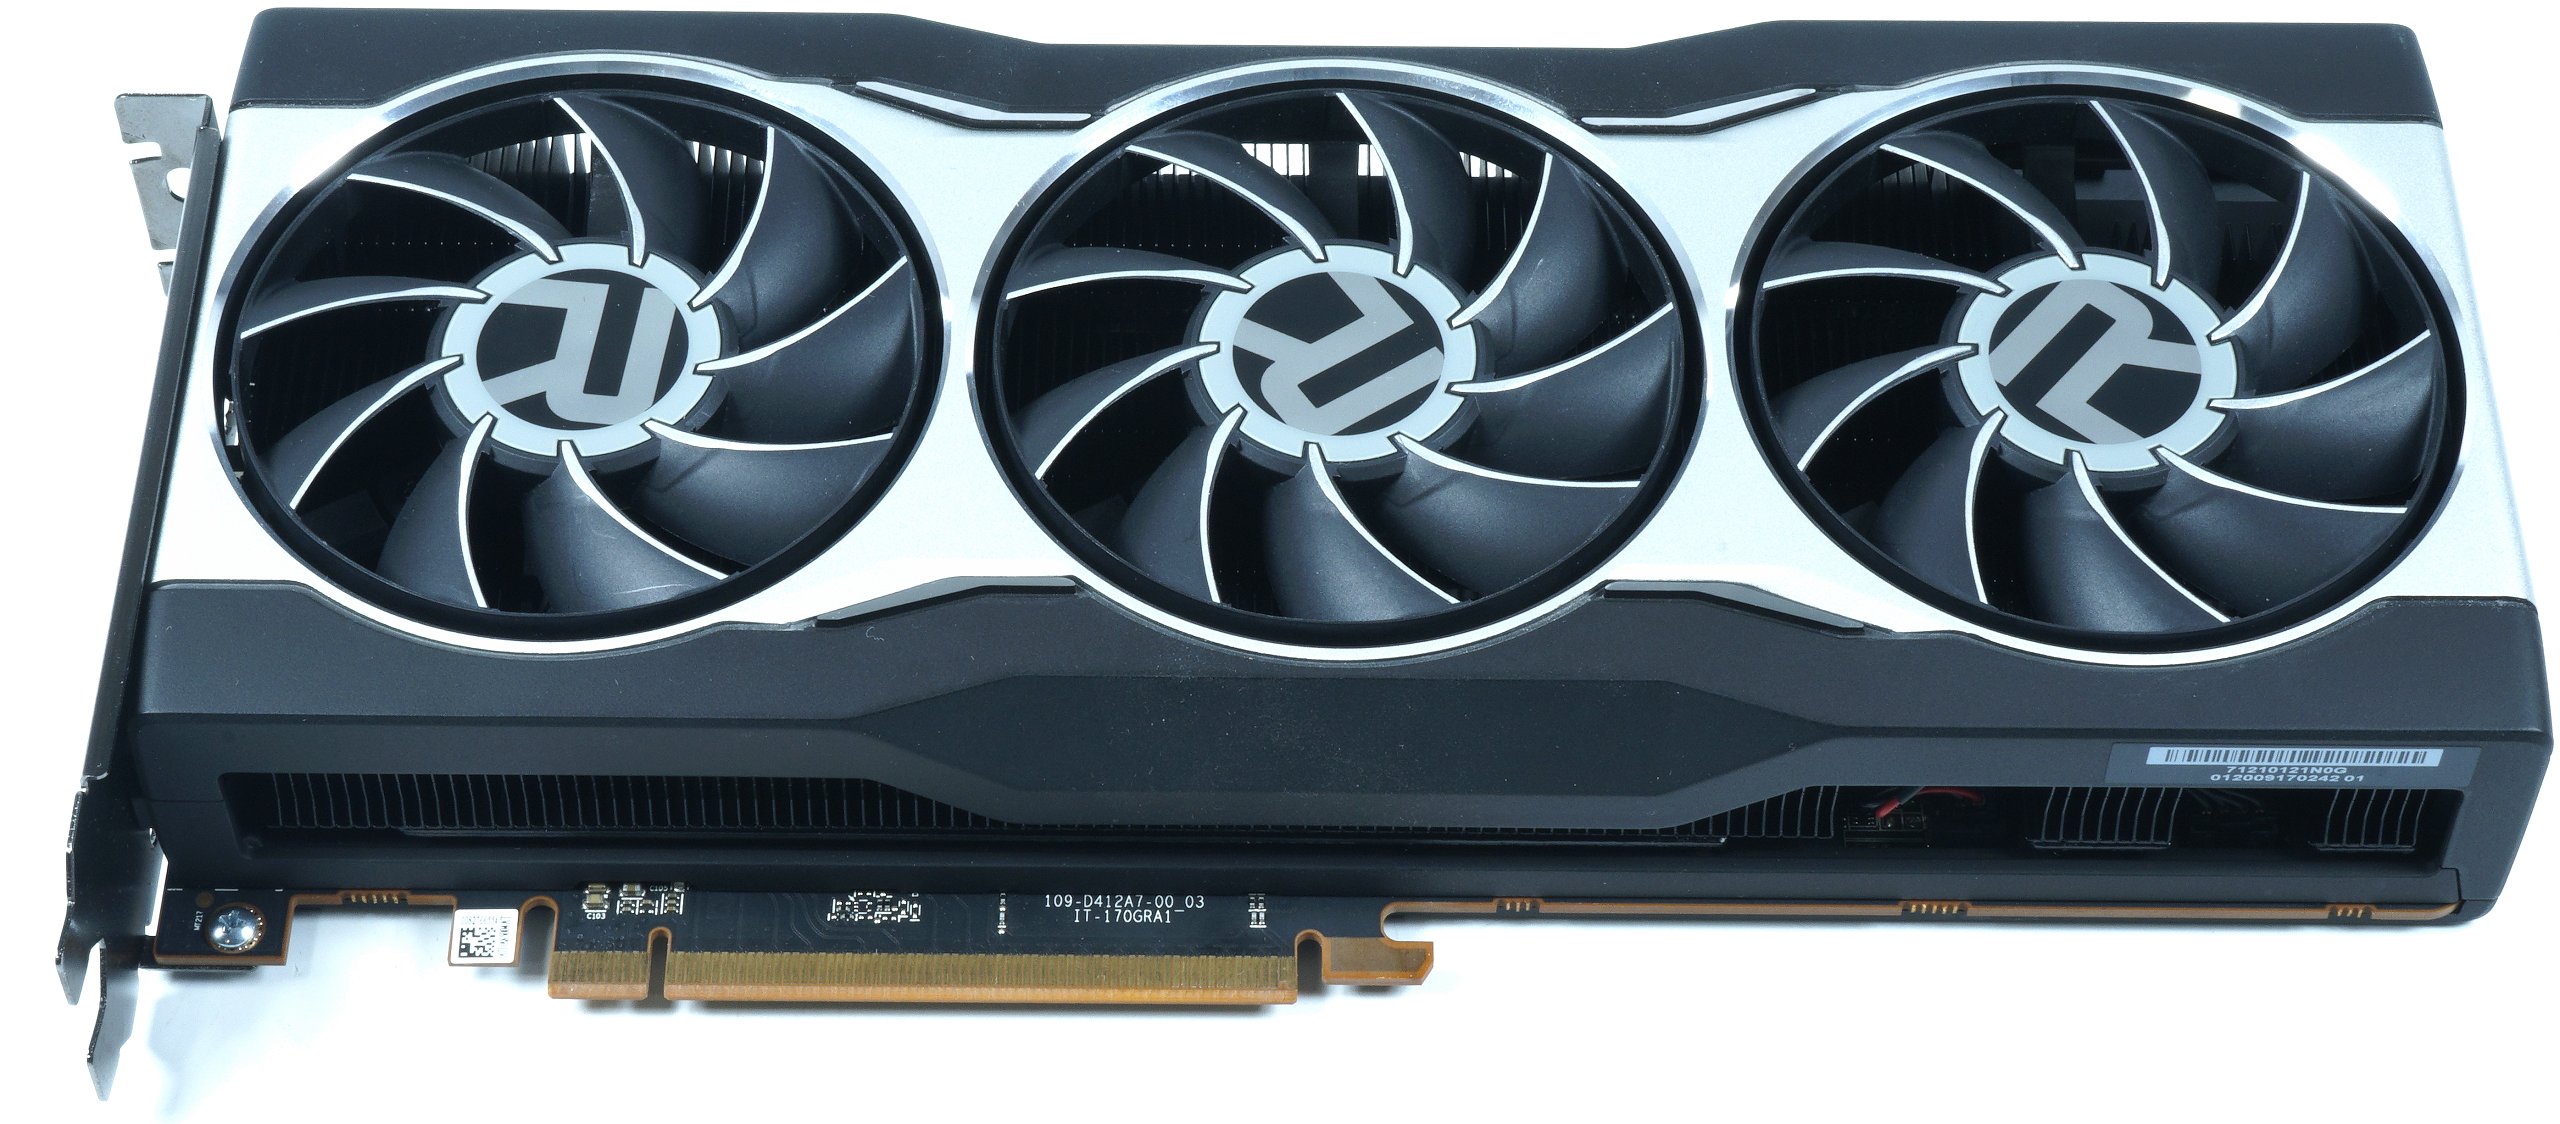 AMD Radeon RX 6800 XT Reportedly An Overclockers Dream, Up To 2.5 GHz+ OC &  On Par With RTX 3090 at $649 US